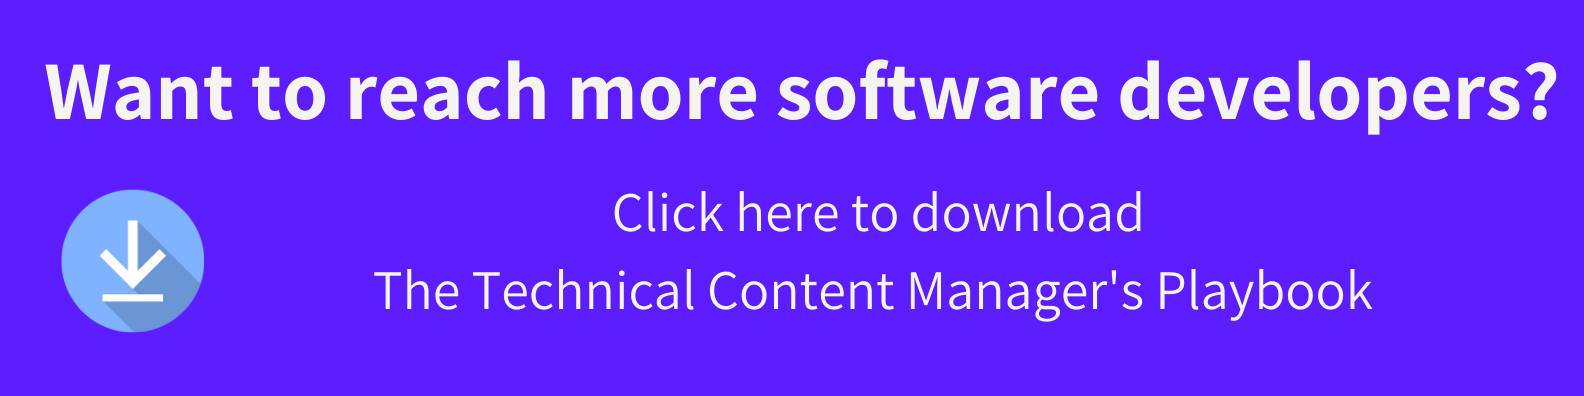 Download The Technical Content Manager's Playbook